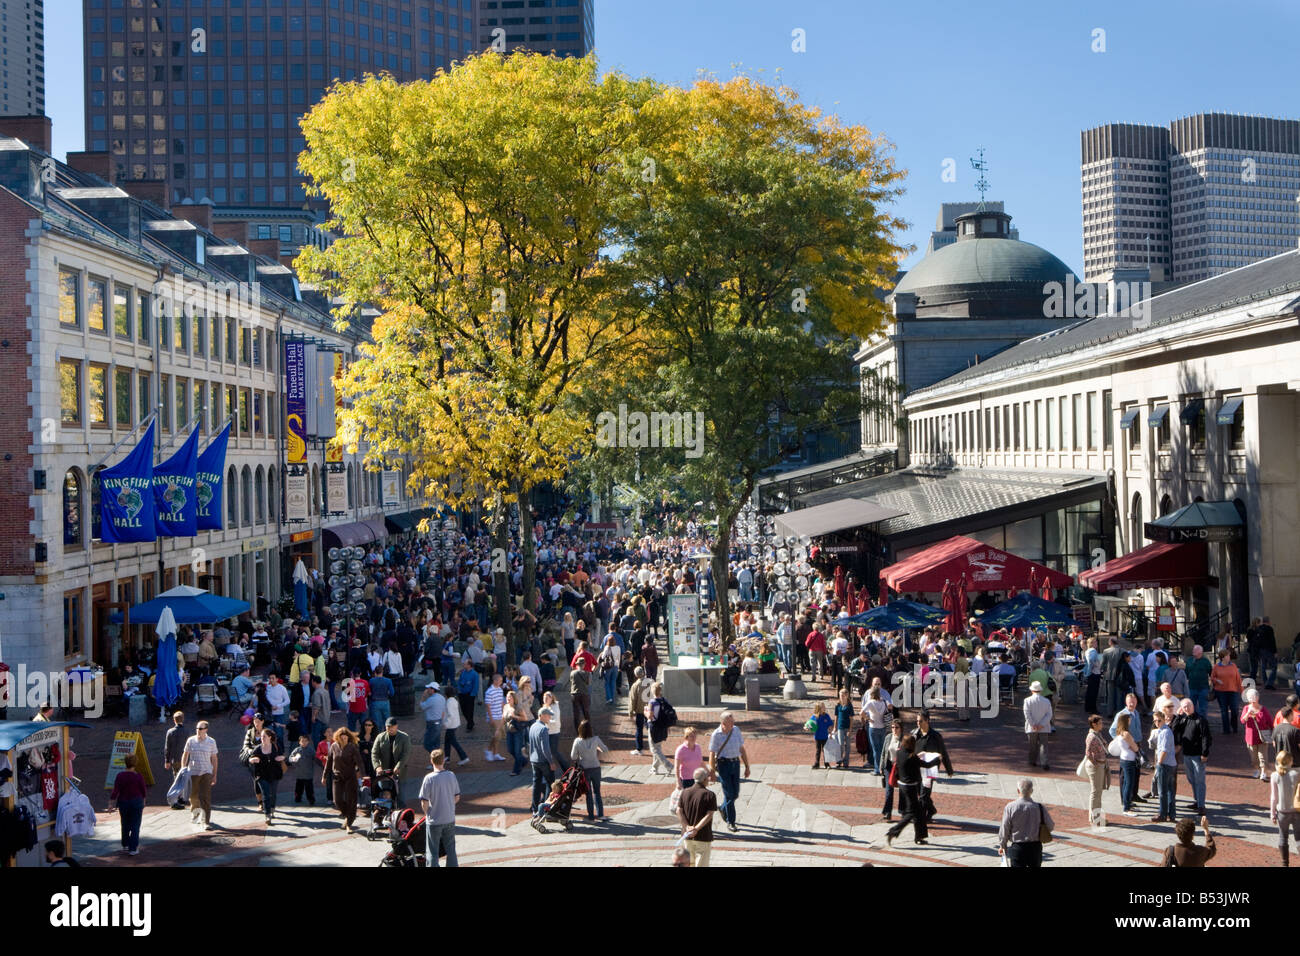 Faneuil Hall Marketplace and Quincy Market, Boston, Massachusetts, USA